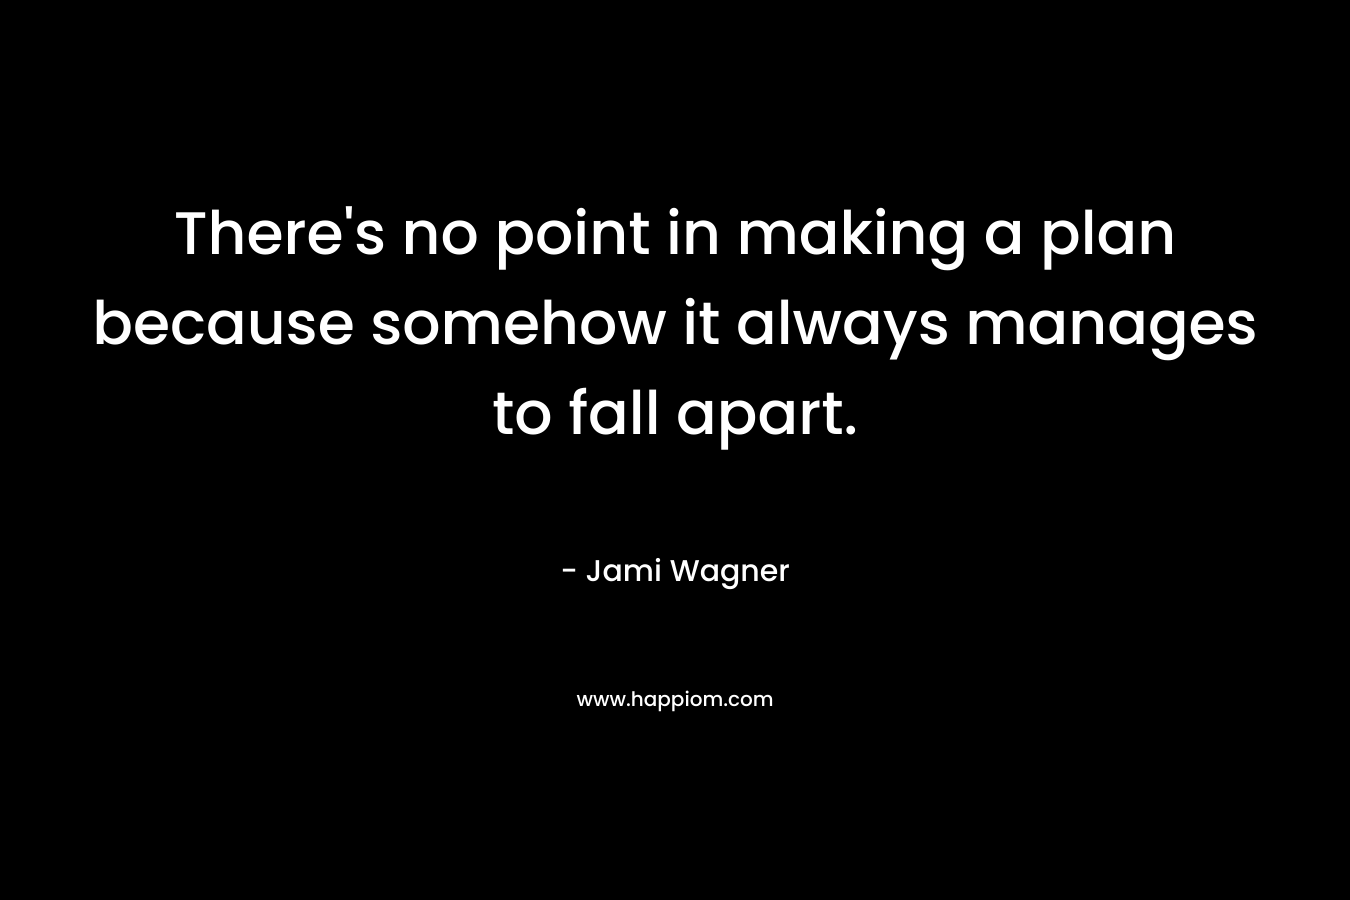 There's no point in making a plan because somehow it always manages to fall apart.